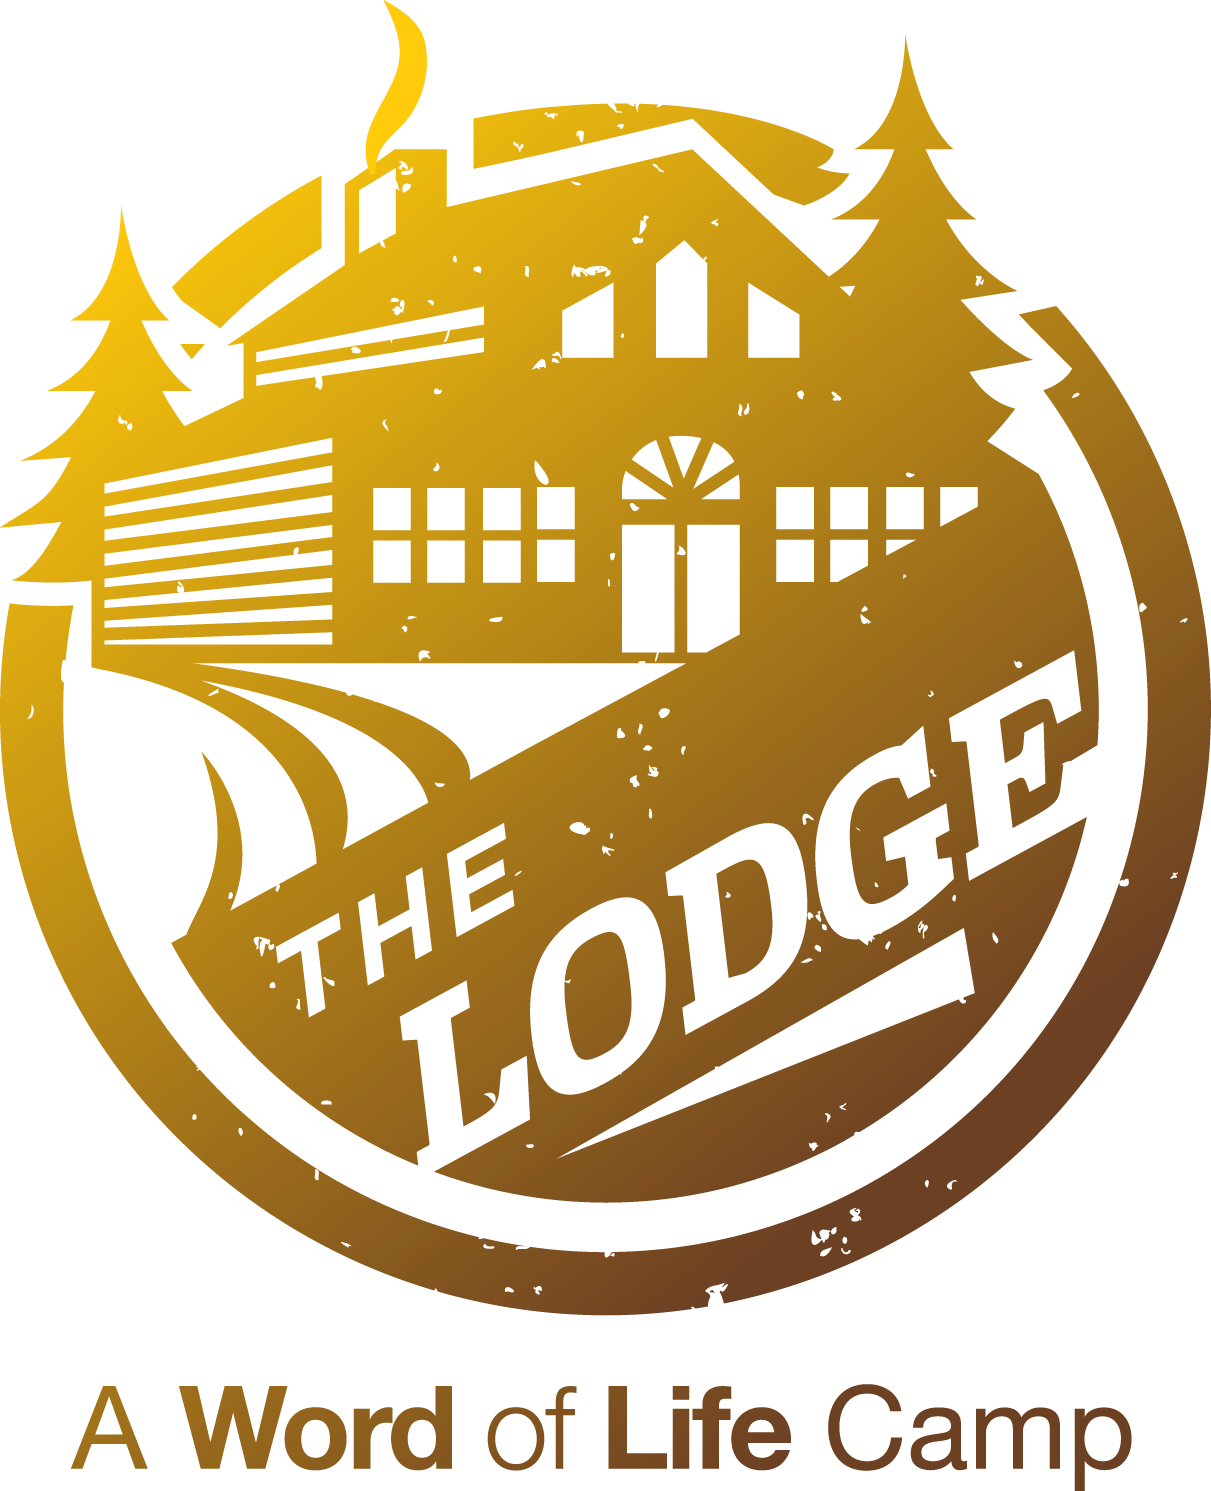 Lodge Logo - The Lodge Resort - Camps - Word of Life